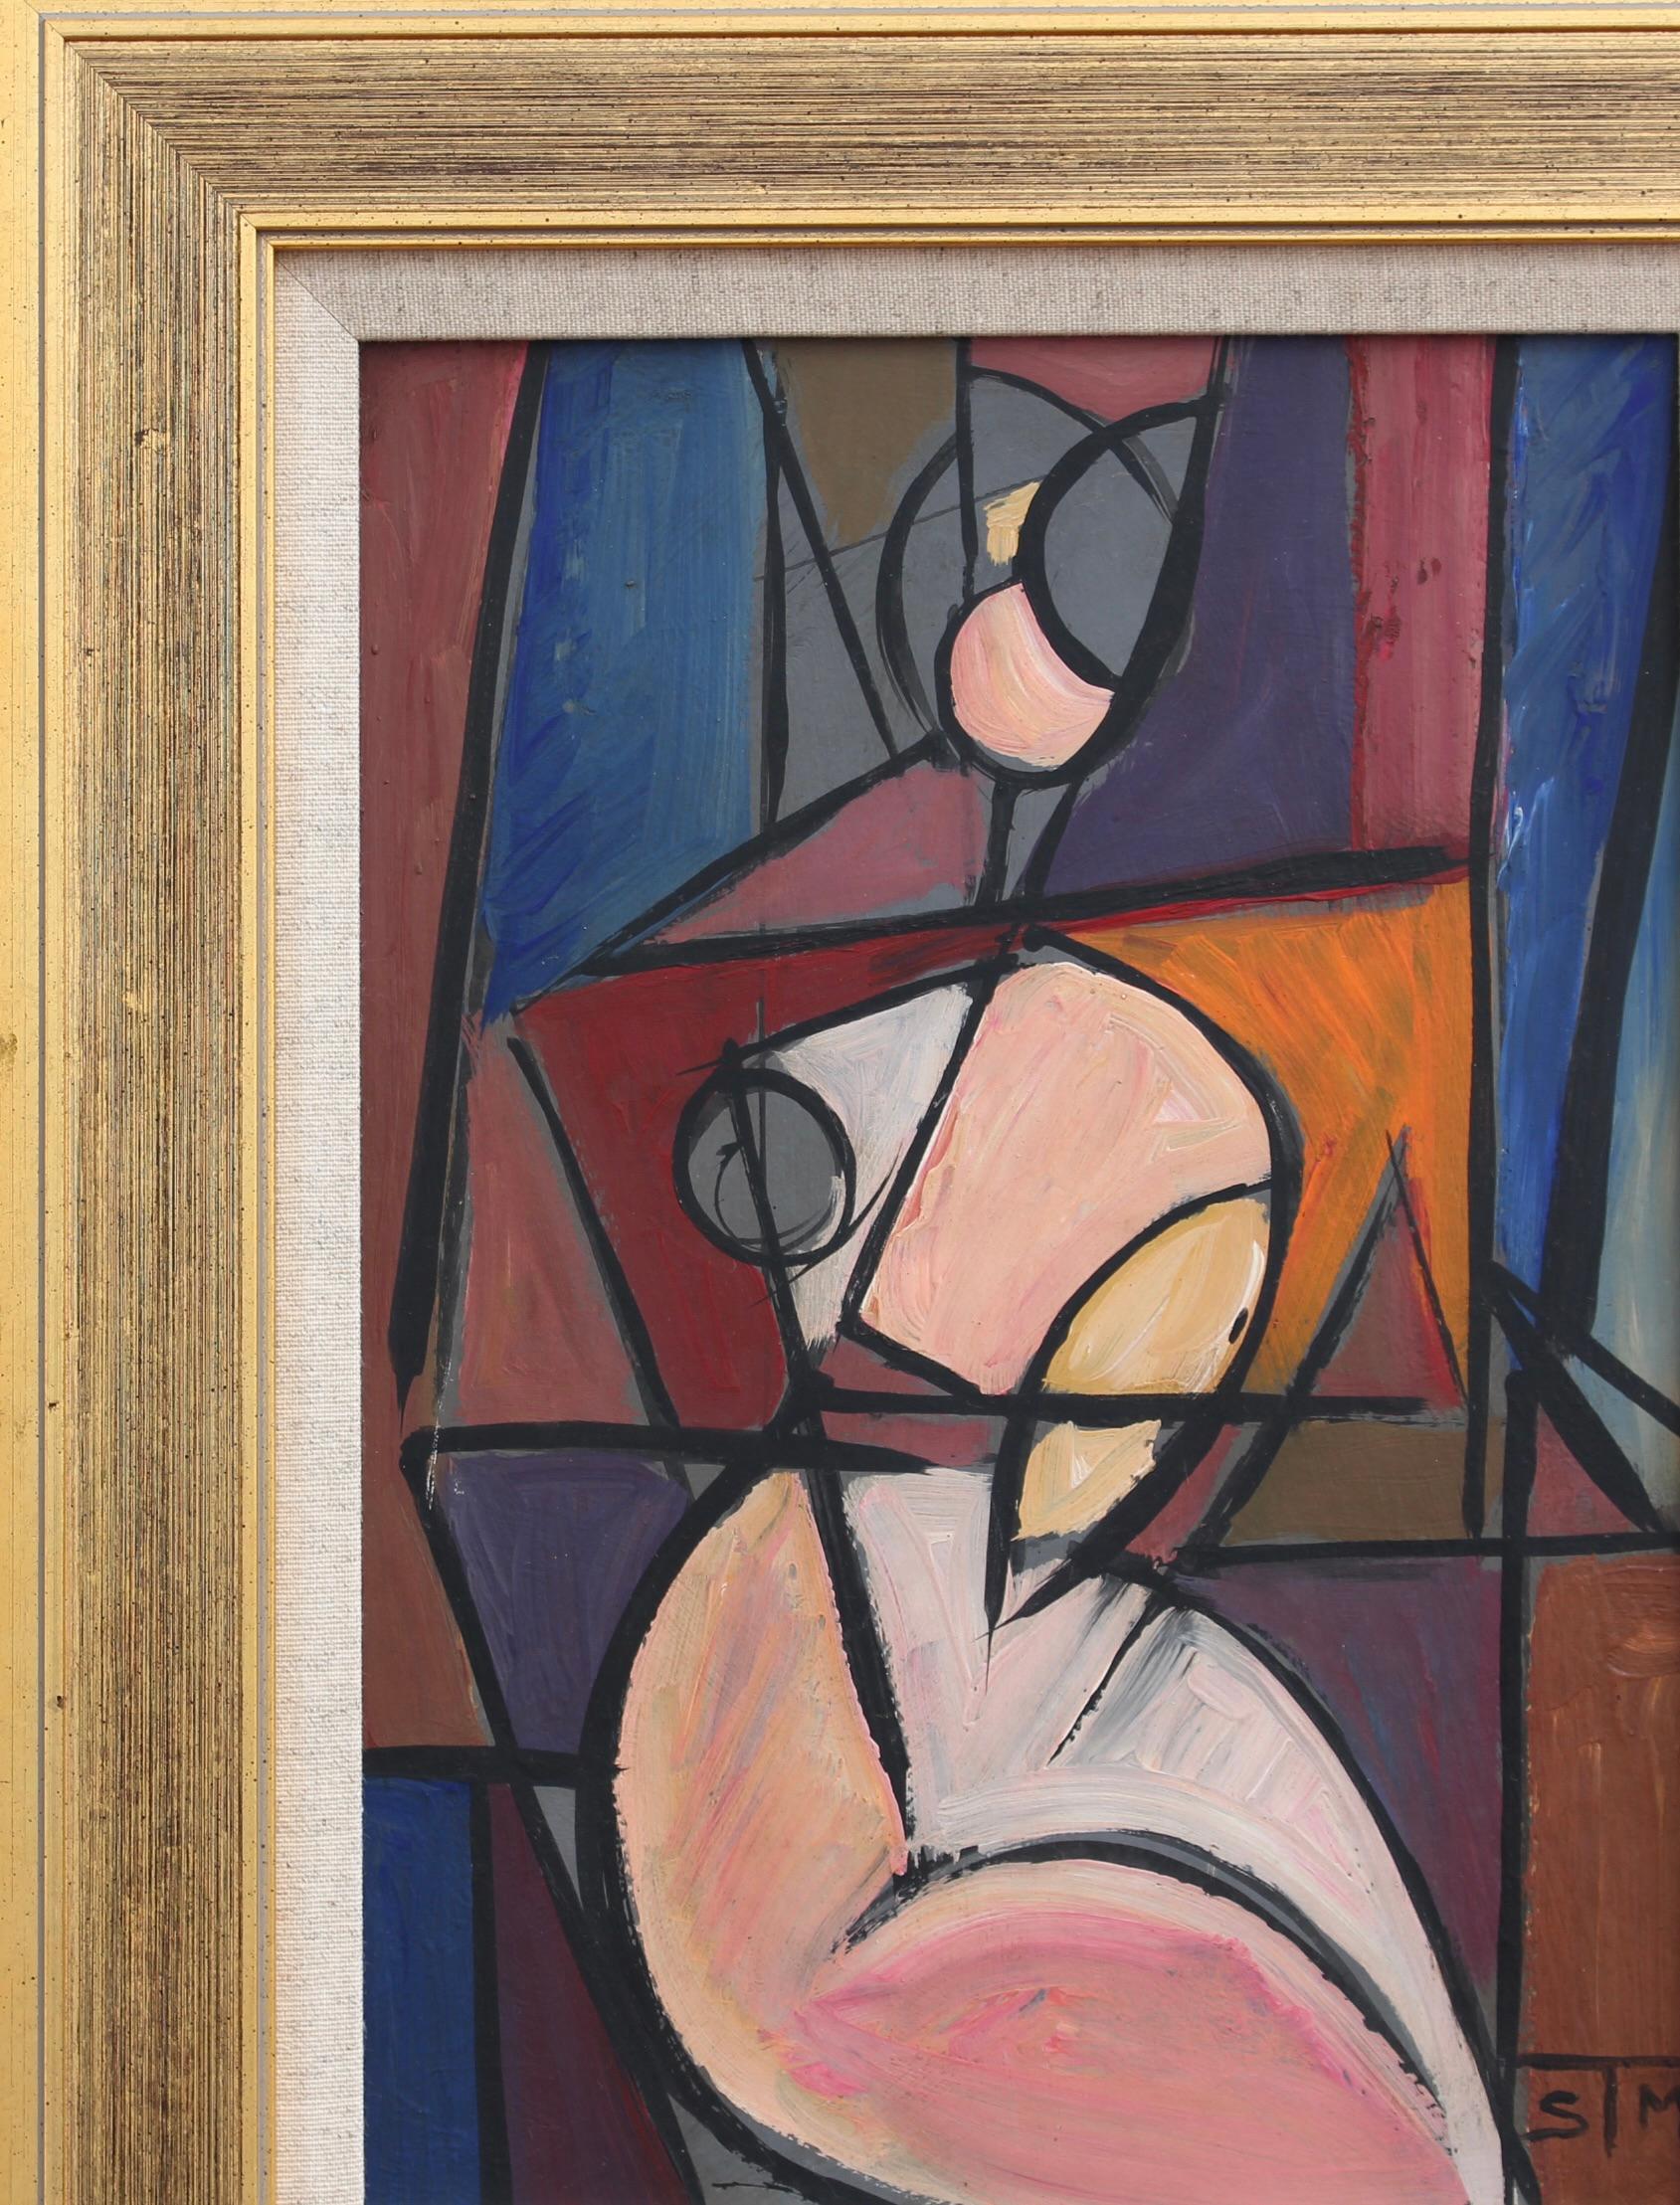 'Radiant Reflections: Cubist Portrait of a Woman', oil on board, by STM (circa 1970s). A superb late mid-century painting by an artist with the initials STM. Clearly inspired by cubists Picasso and Braque, the artist uses angles, lines and vibrant